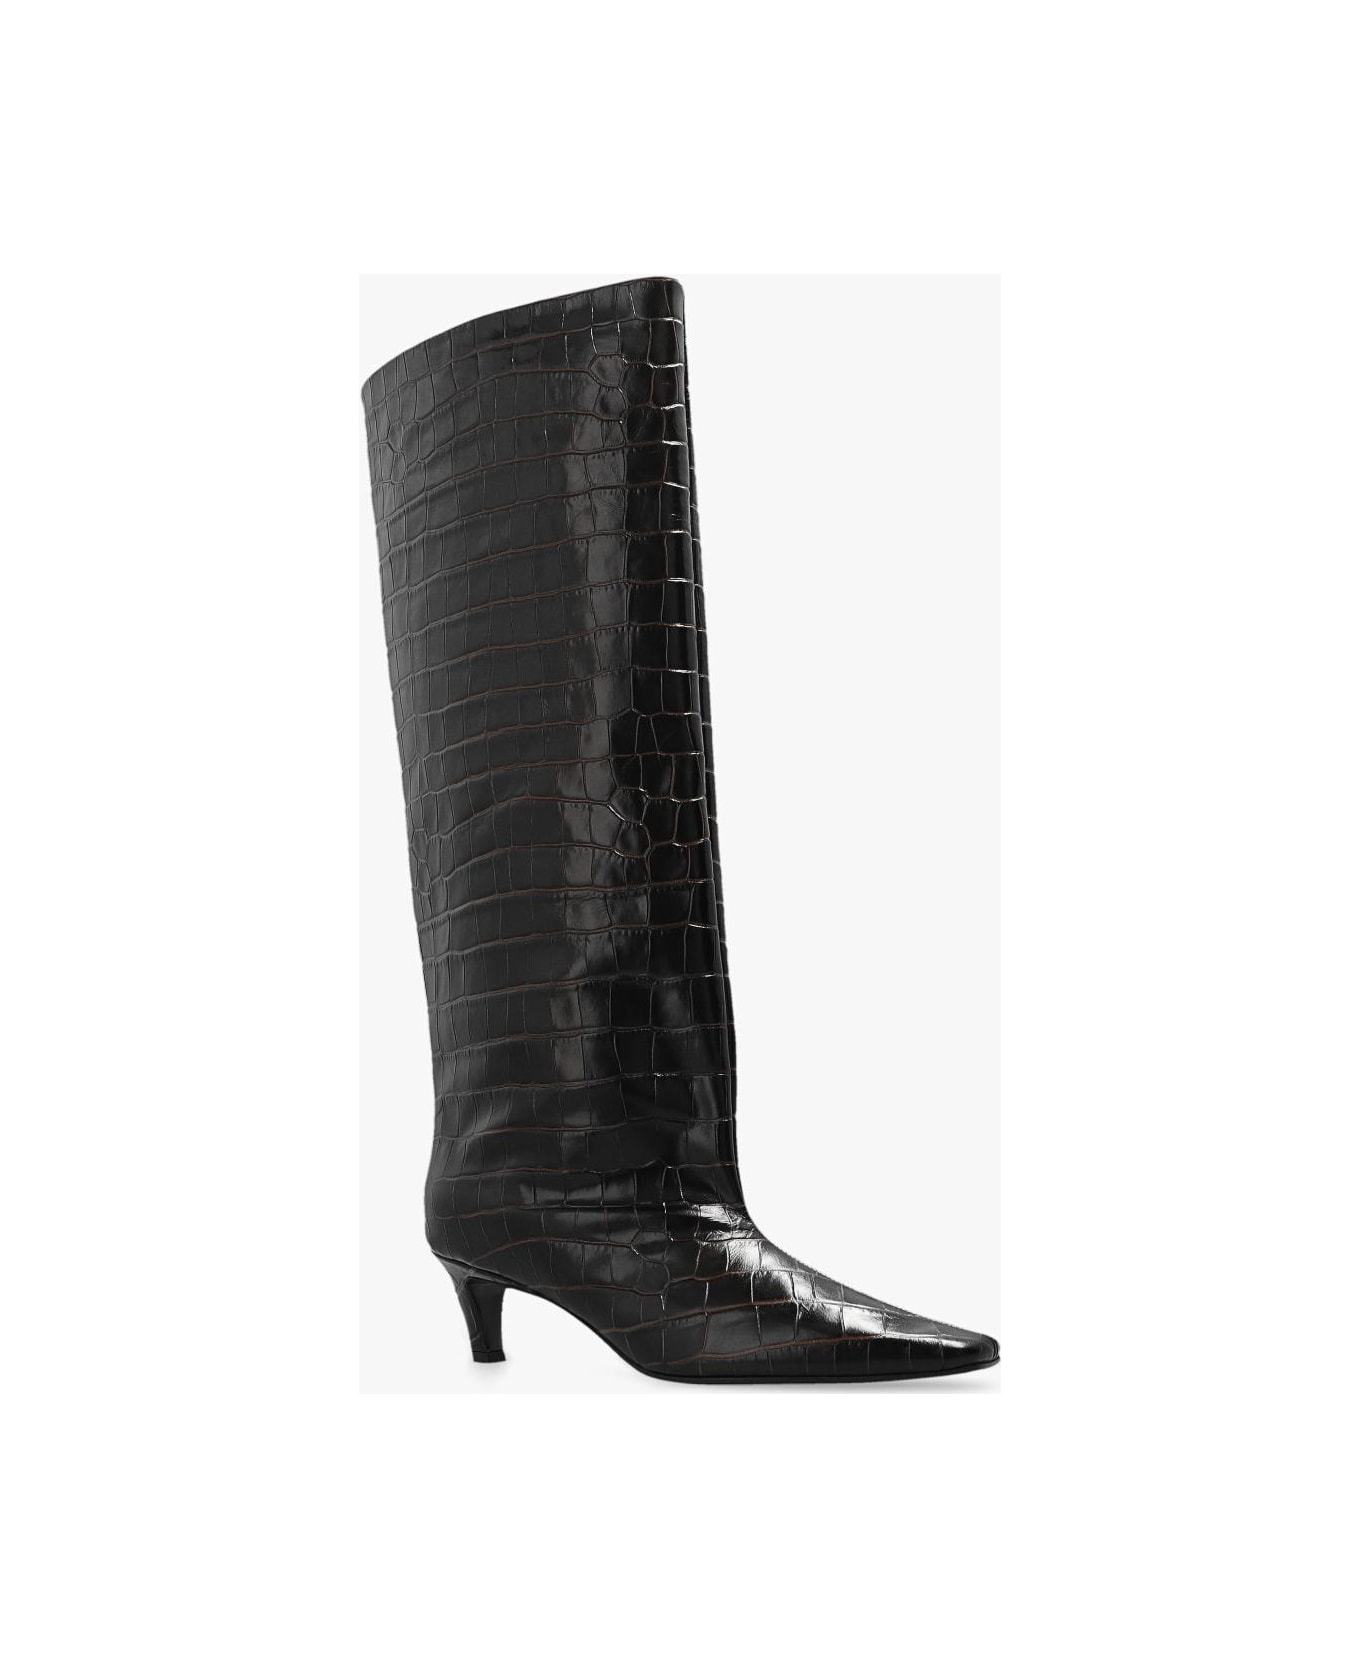 Totême 'shaft' Heeled Boots - 892 Delevingne selected a pair of white pointed-toe boots with a